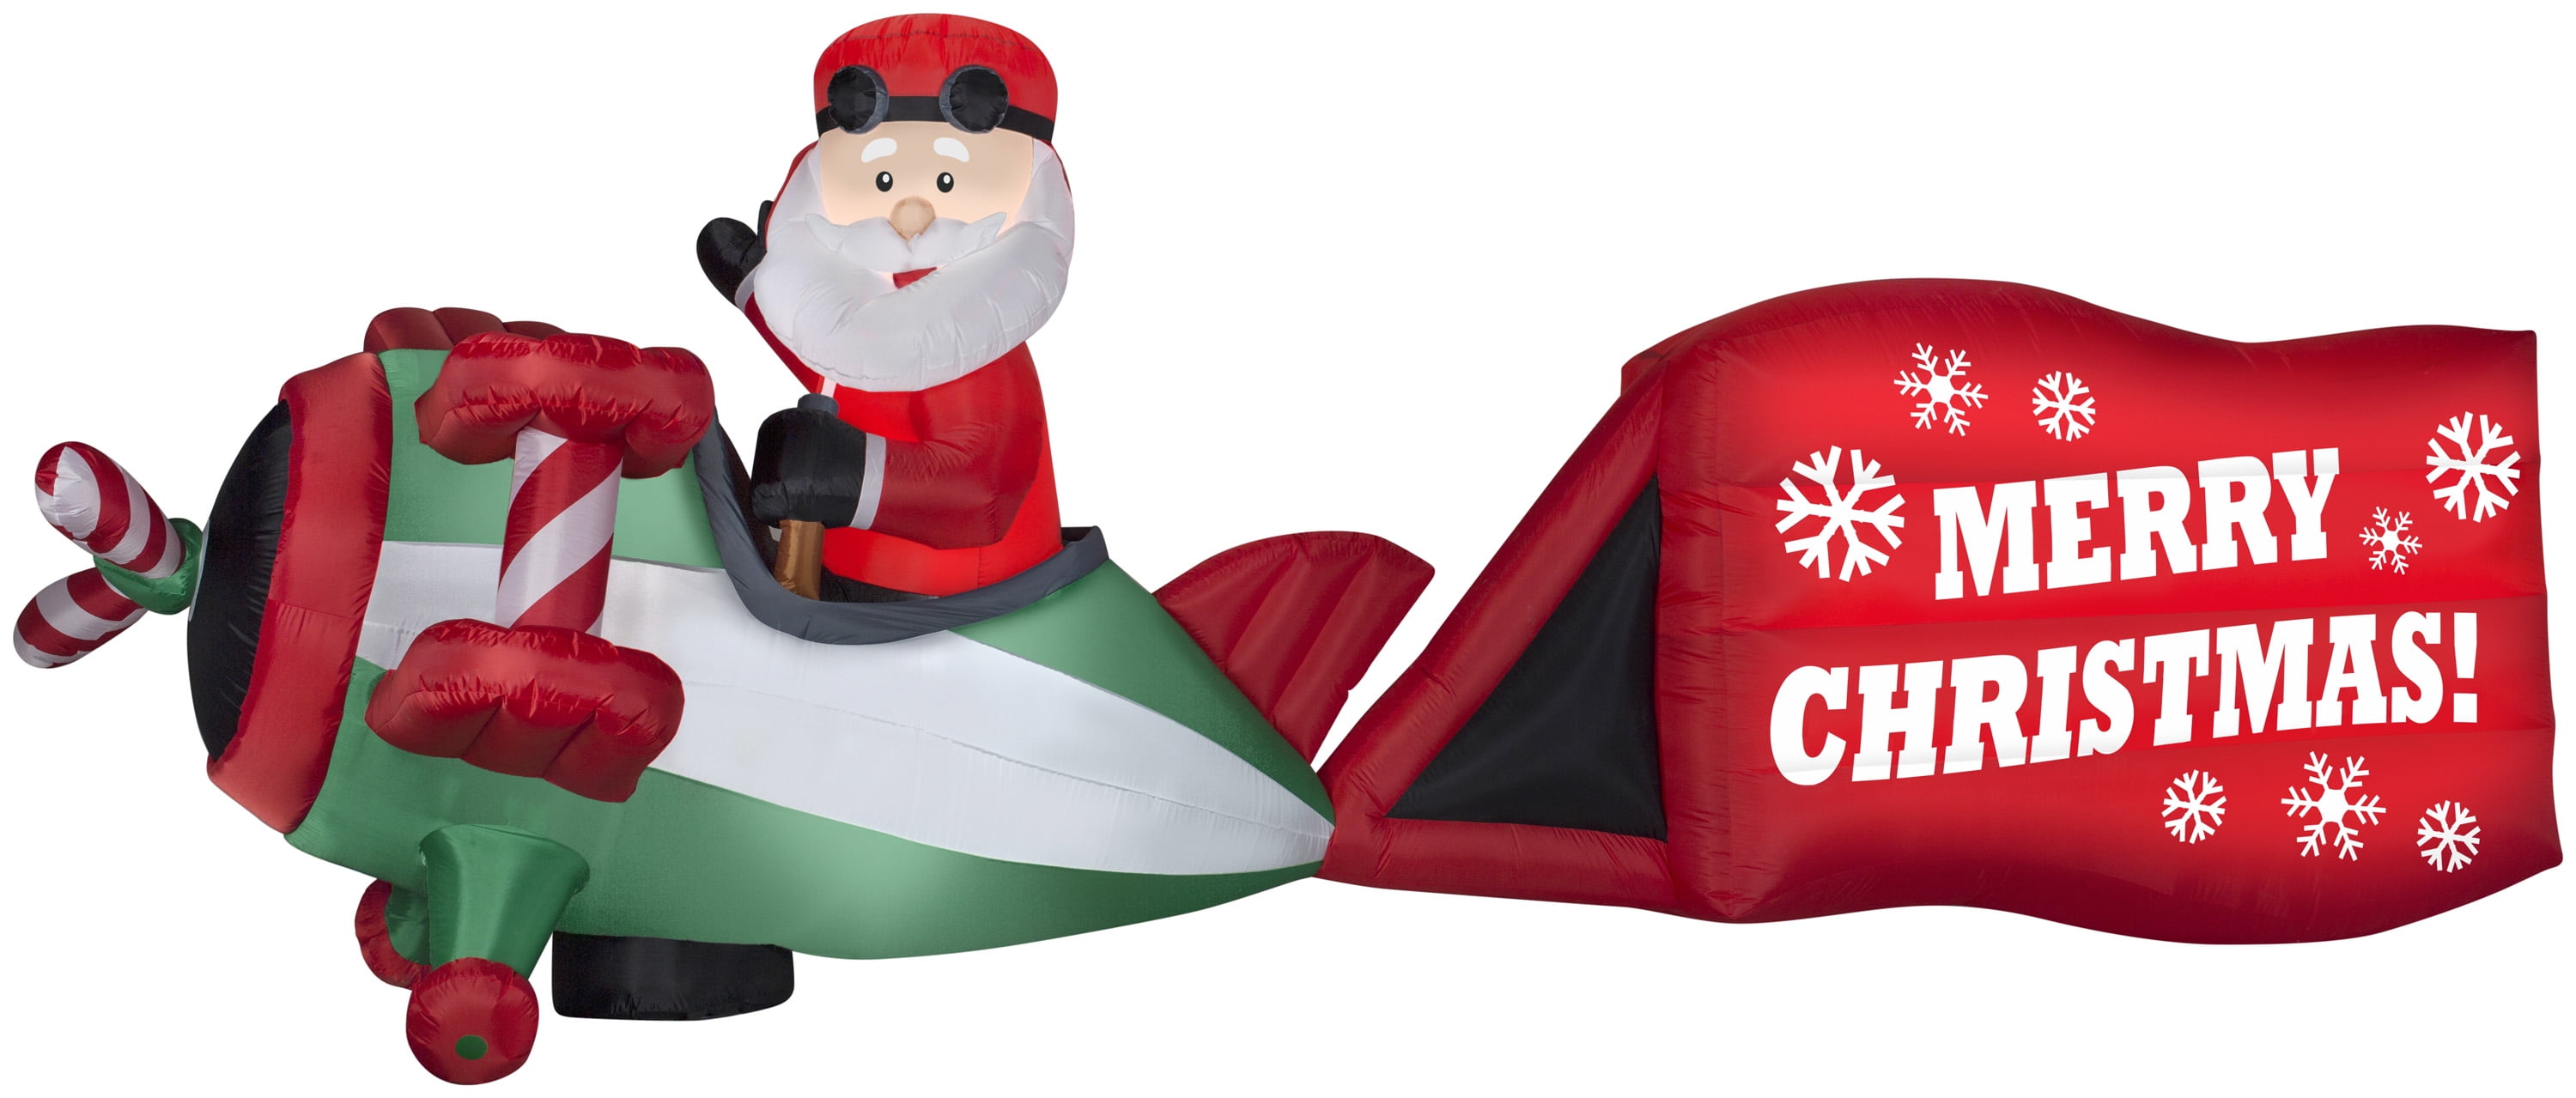 HUGE 16 FT CHRISTMAS SANTA  AIRPLANE WITH BANNER PLANE AIRBLOWN INFLATABLE 